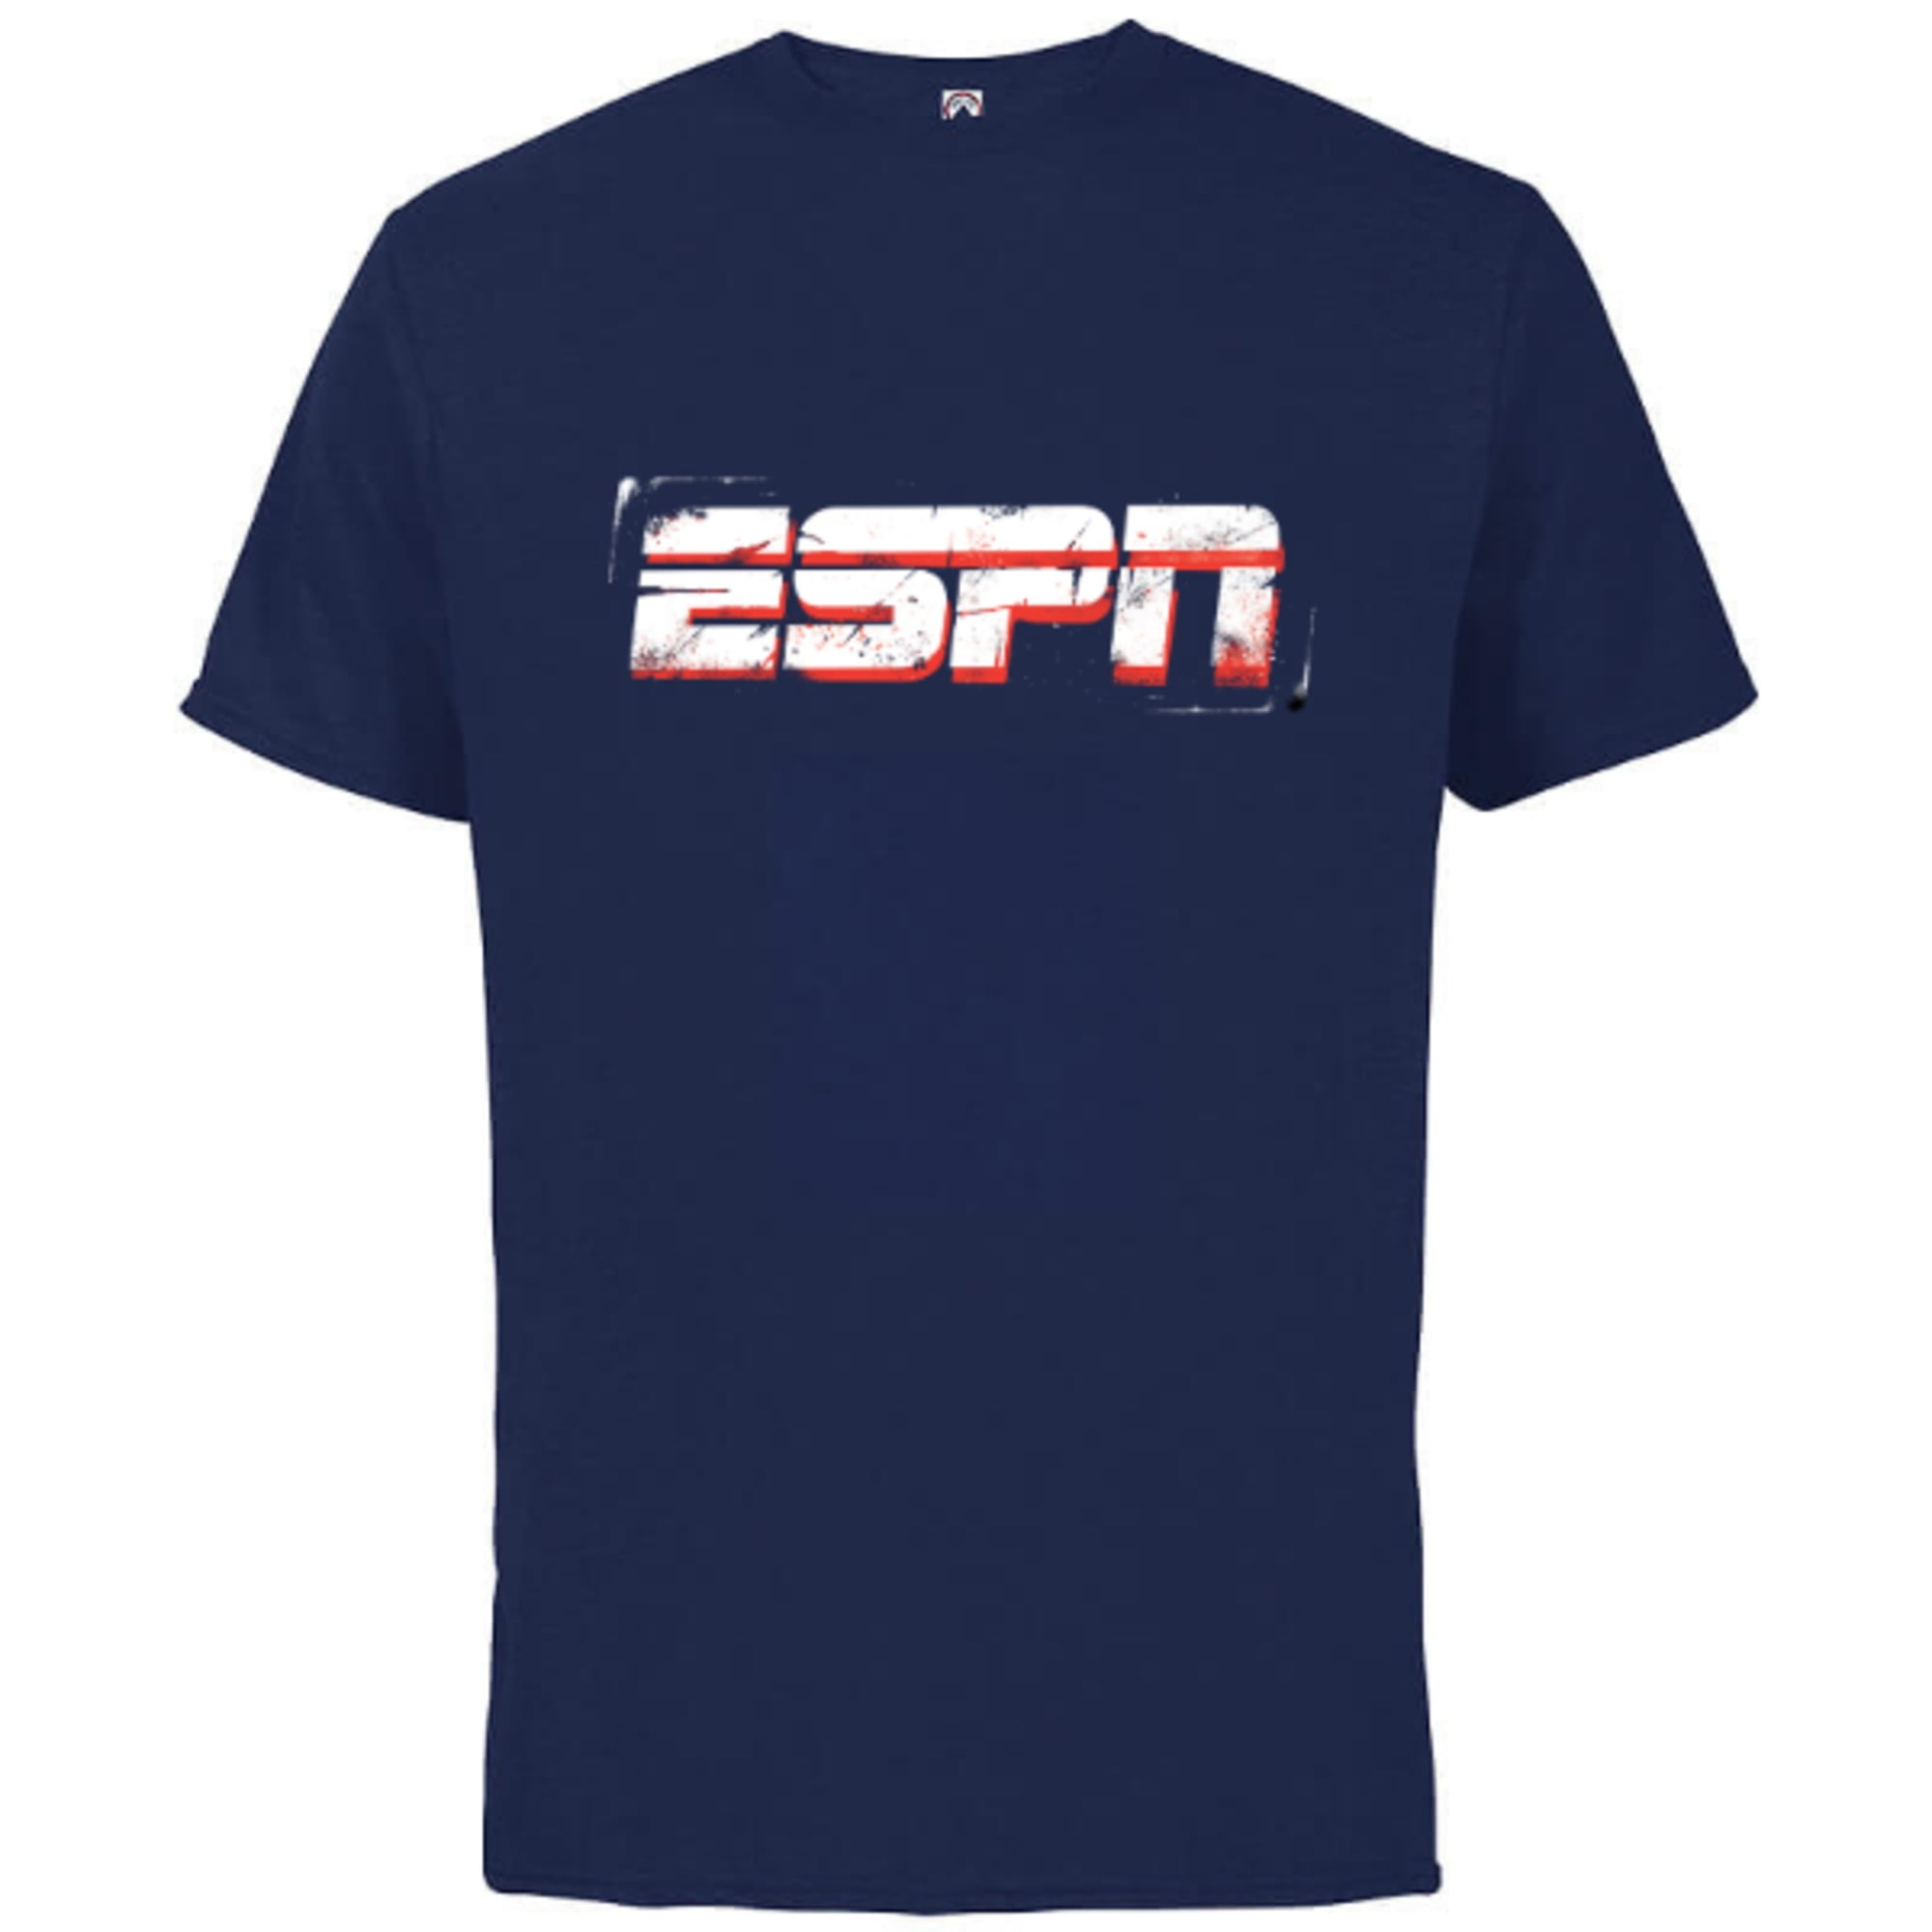 ESPN Logo Distressed Red and White Standard - Short Sleeve Cotton T-Shirt for Adults - Customized-Athletic Navy